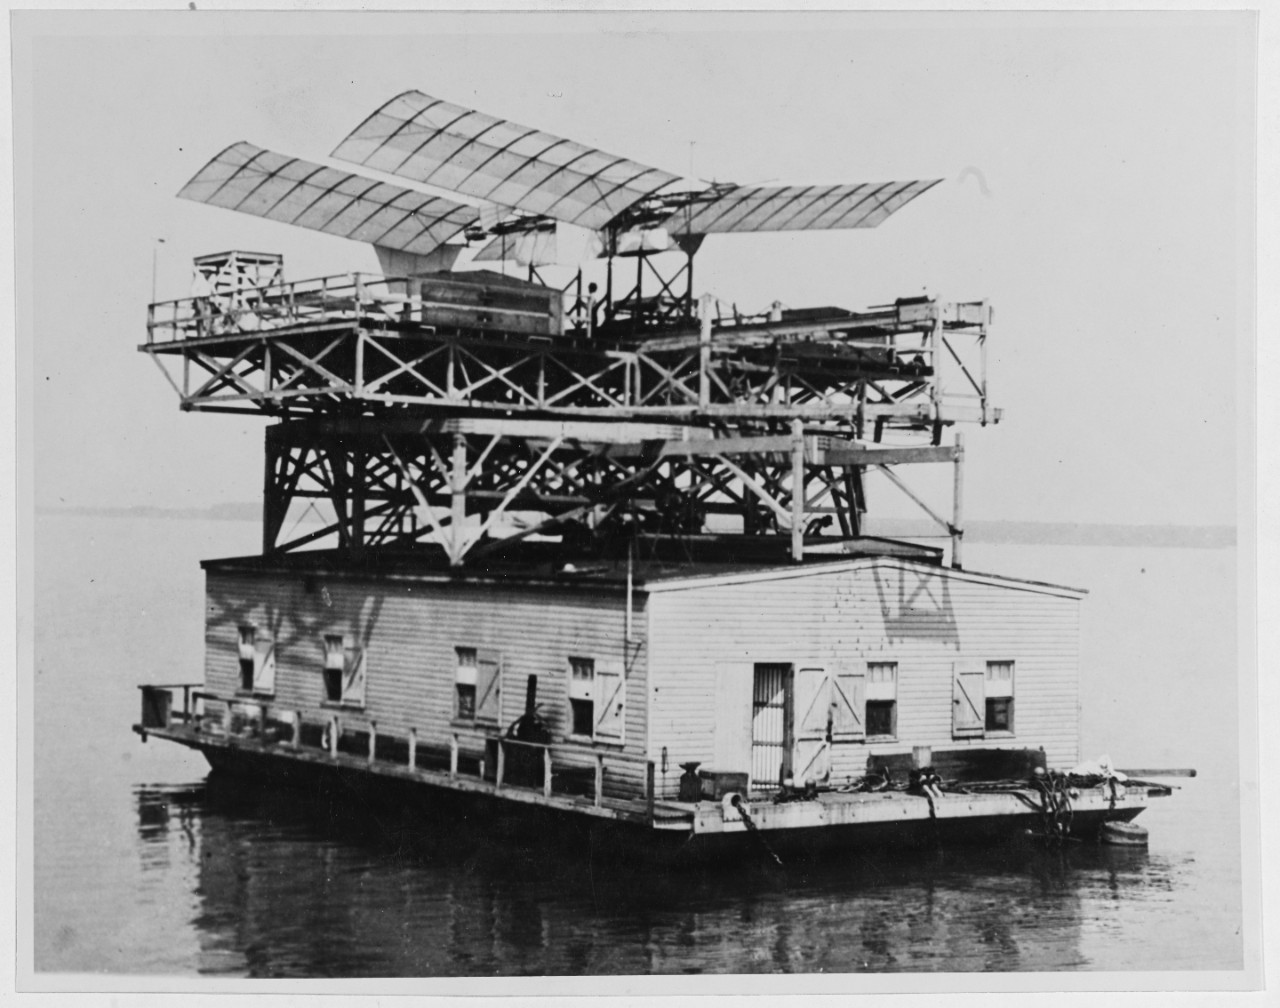 Langley's Full Size Man-carrying Aerodrome on the houseboat in the Potomac River, October 7, 1903. 